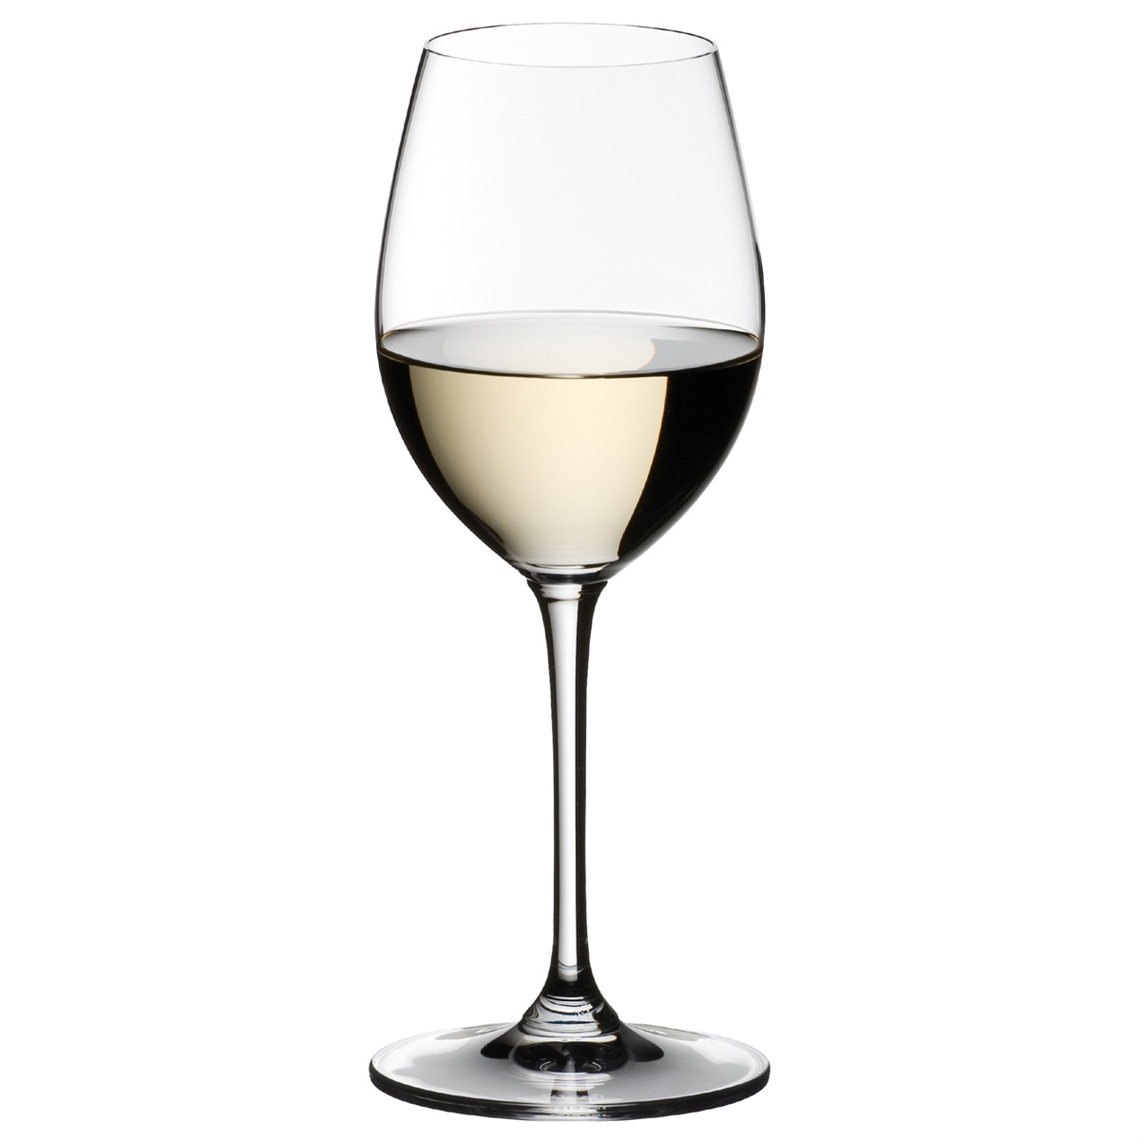 View more beginners guide to different types of wine glasses from our Dessert Wine Glasses range